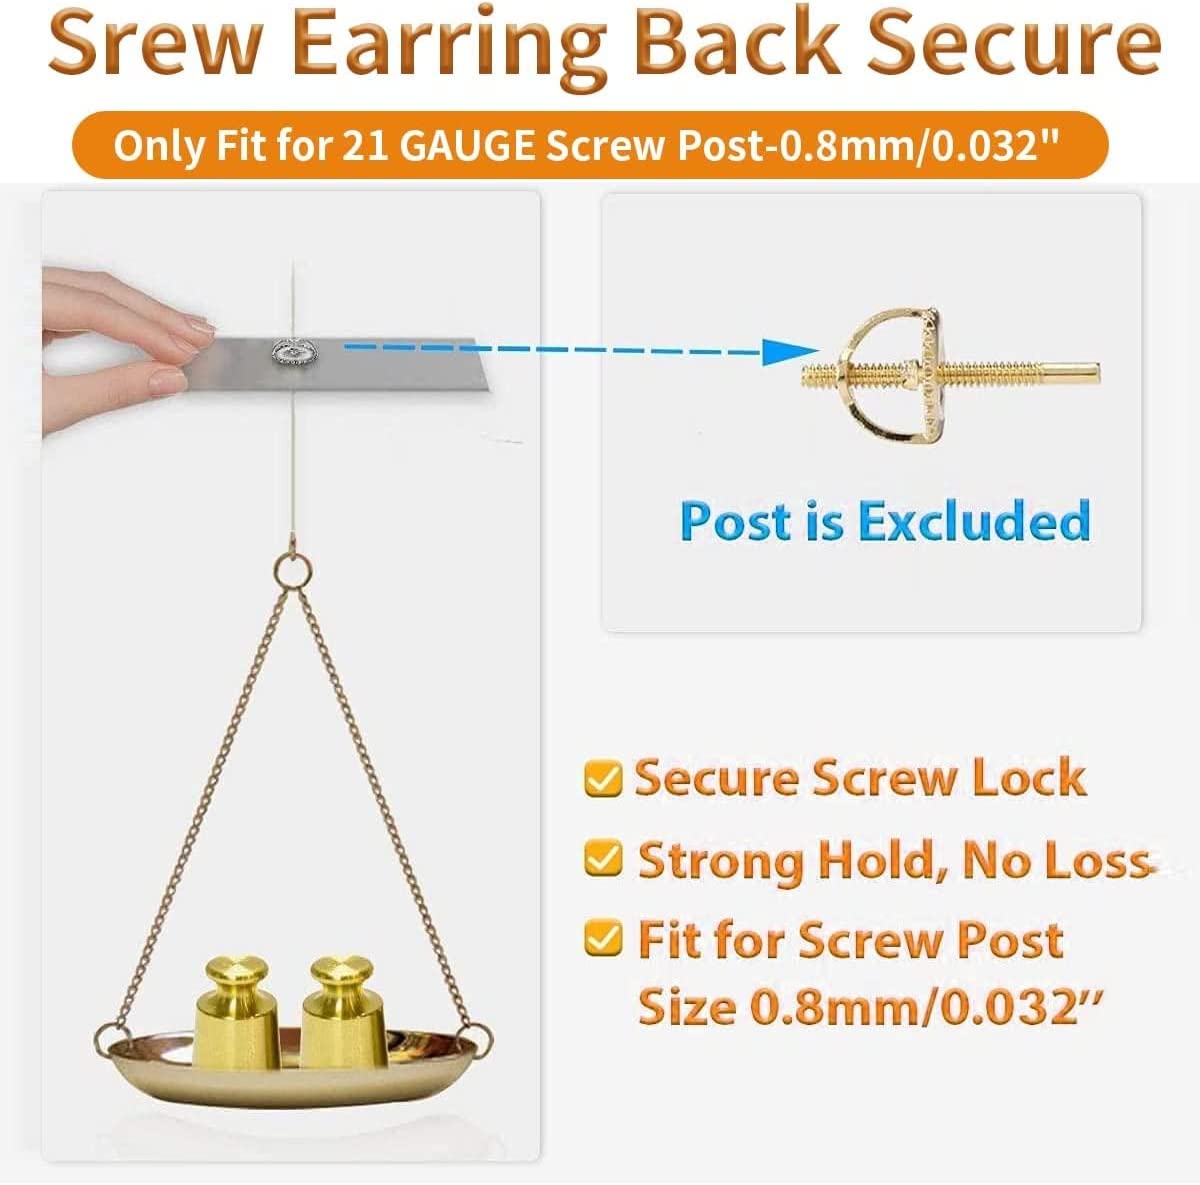 14K Gold Screw-on Earring-Backs Replacement for Threaded Post (0.032'') Only, 4 Pairs Silver Secure ScrewBack Backing Hypoallergenic (5mm Small) - image 5 of 5